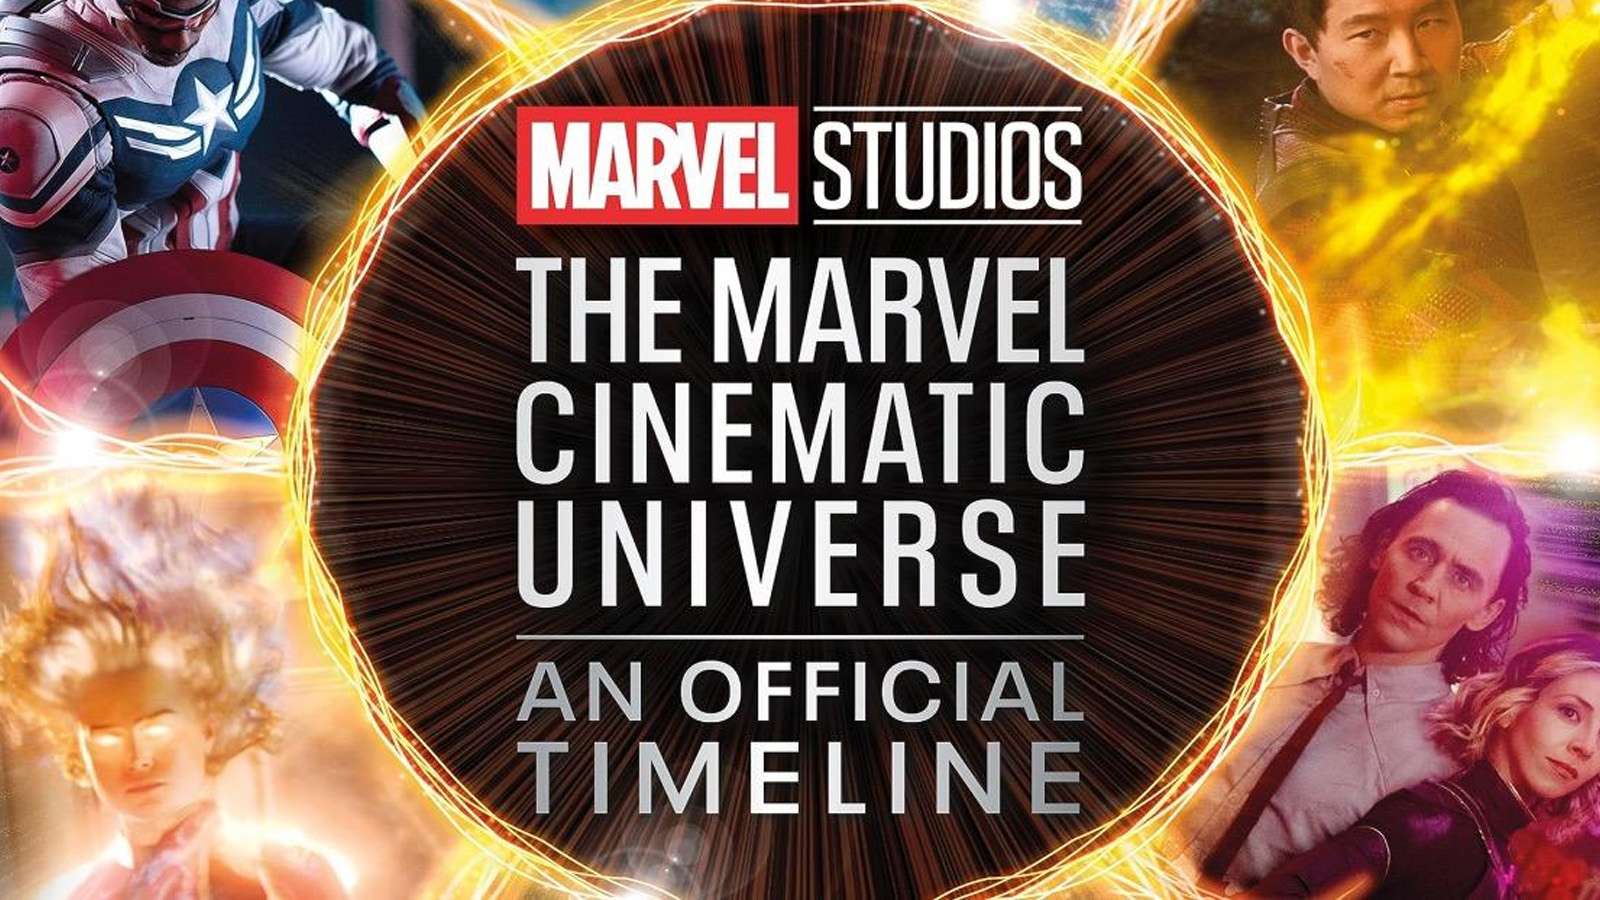 Marvel's official MCU timeline set to clarify what's actually canon once and for all